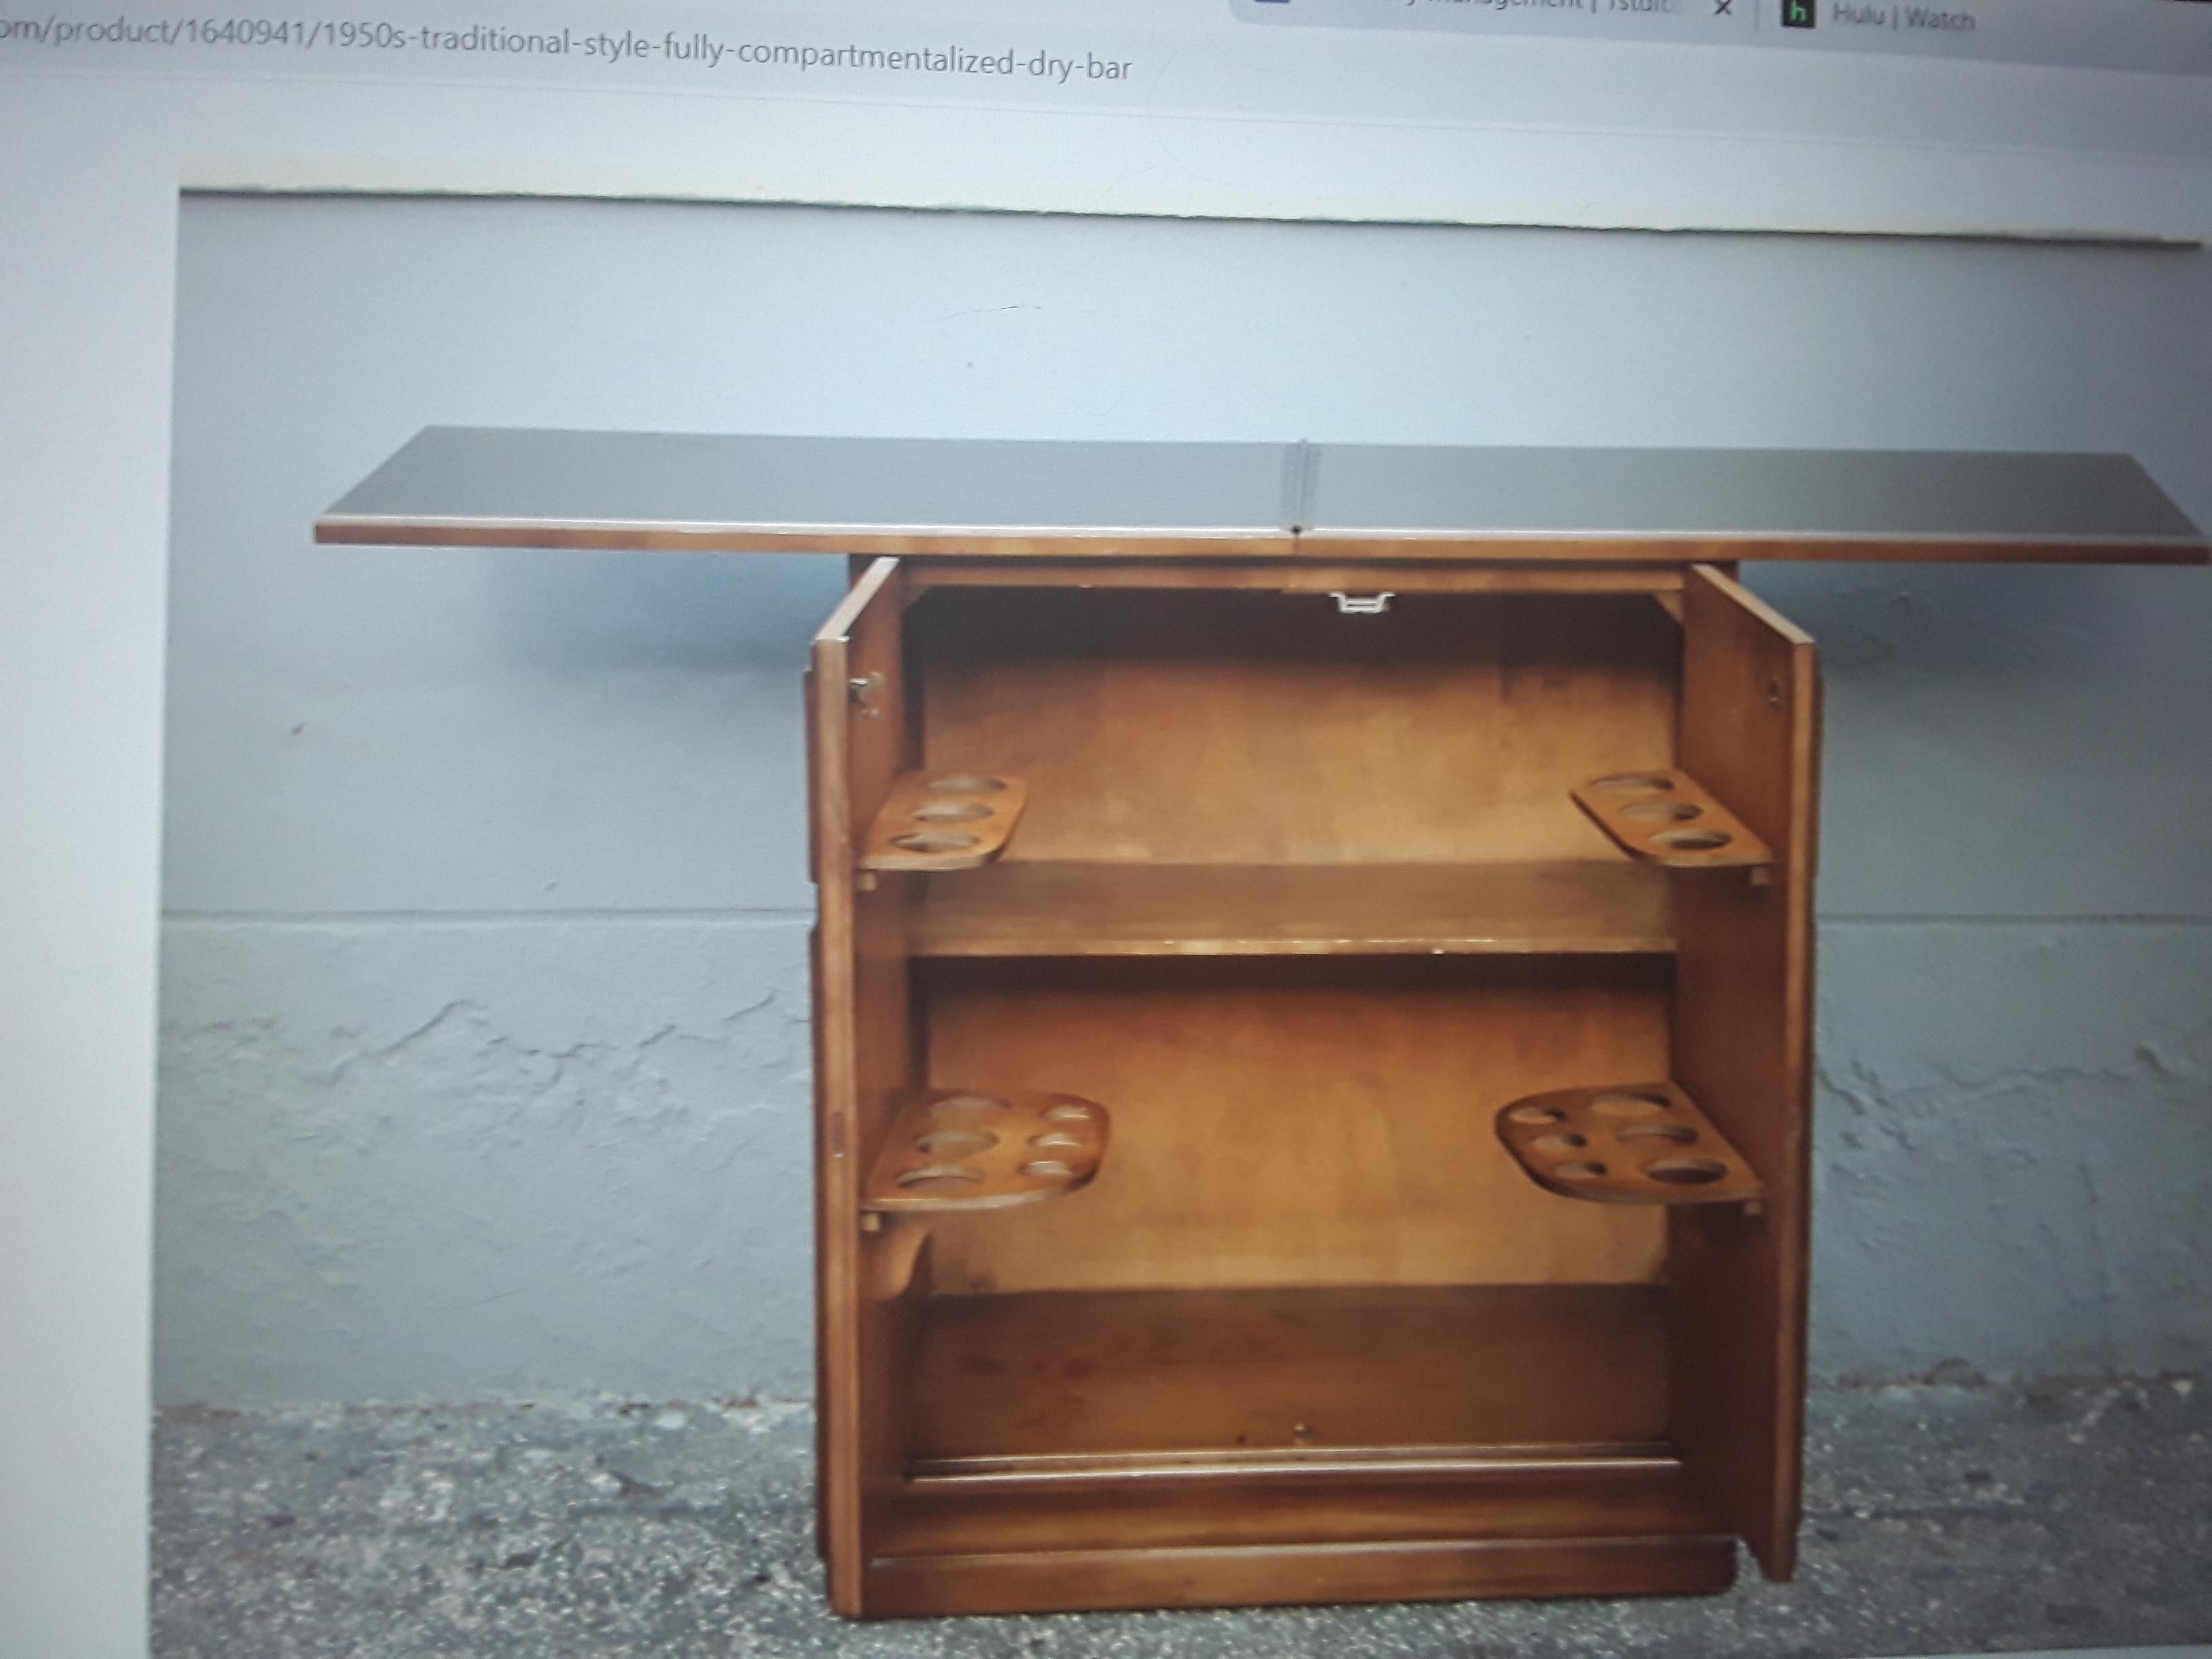 1950's Mid Century Modern Fully Compartmentalized Dry Bar im Angebot 2